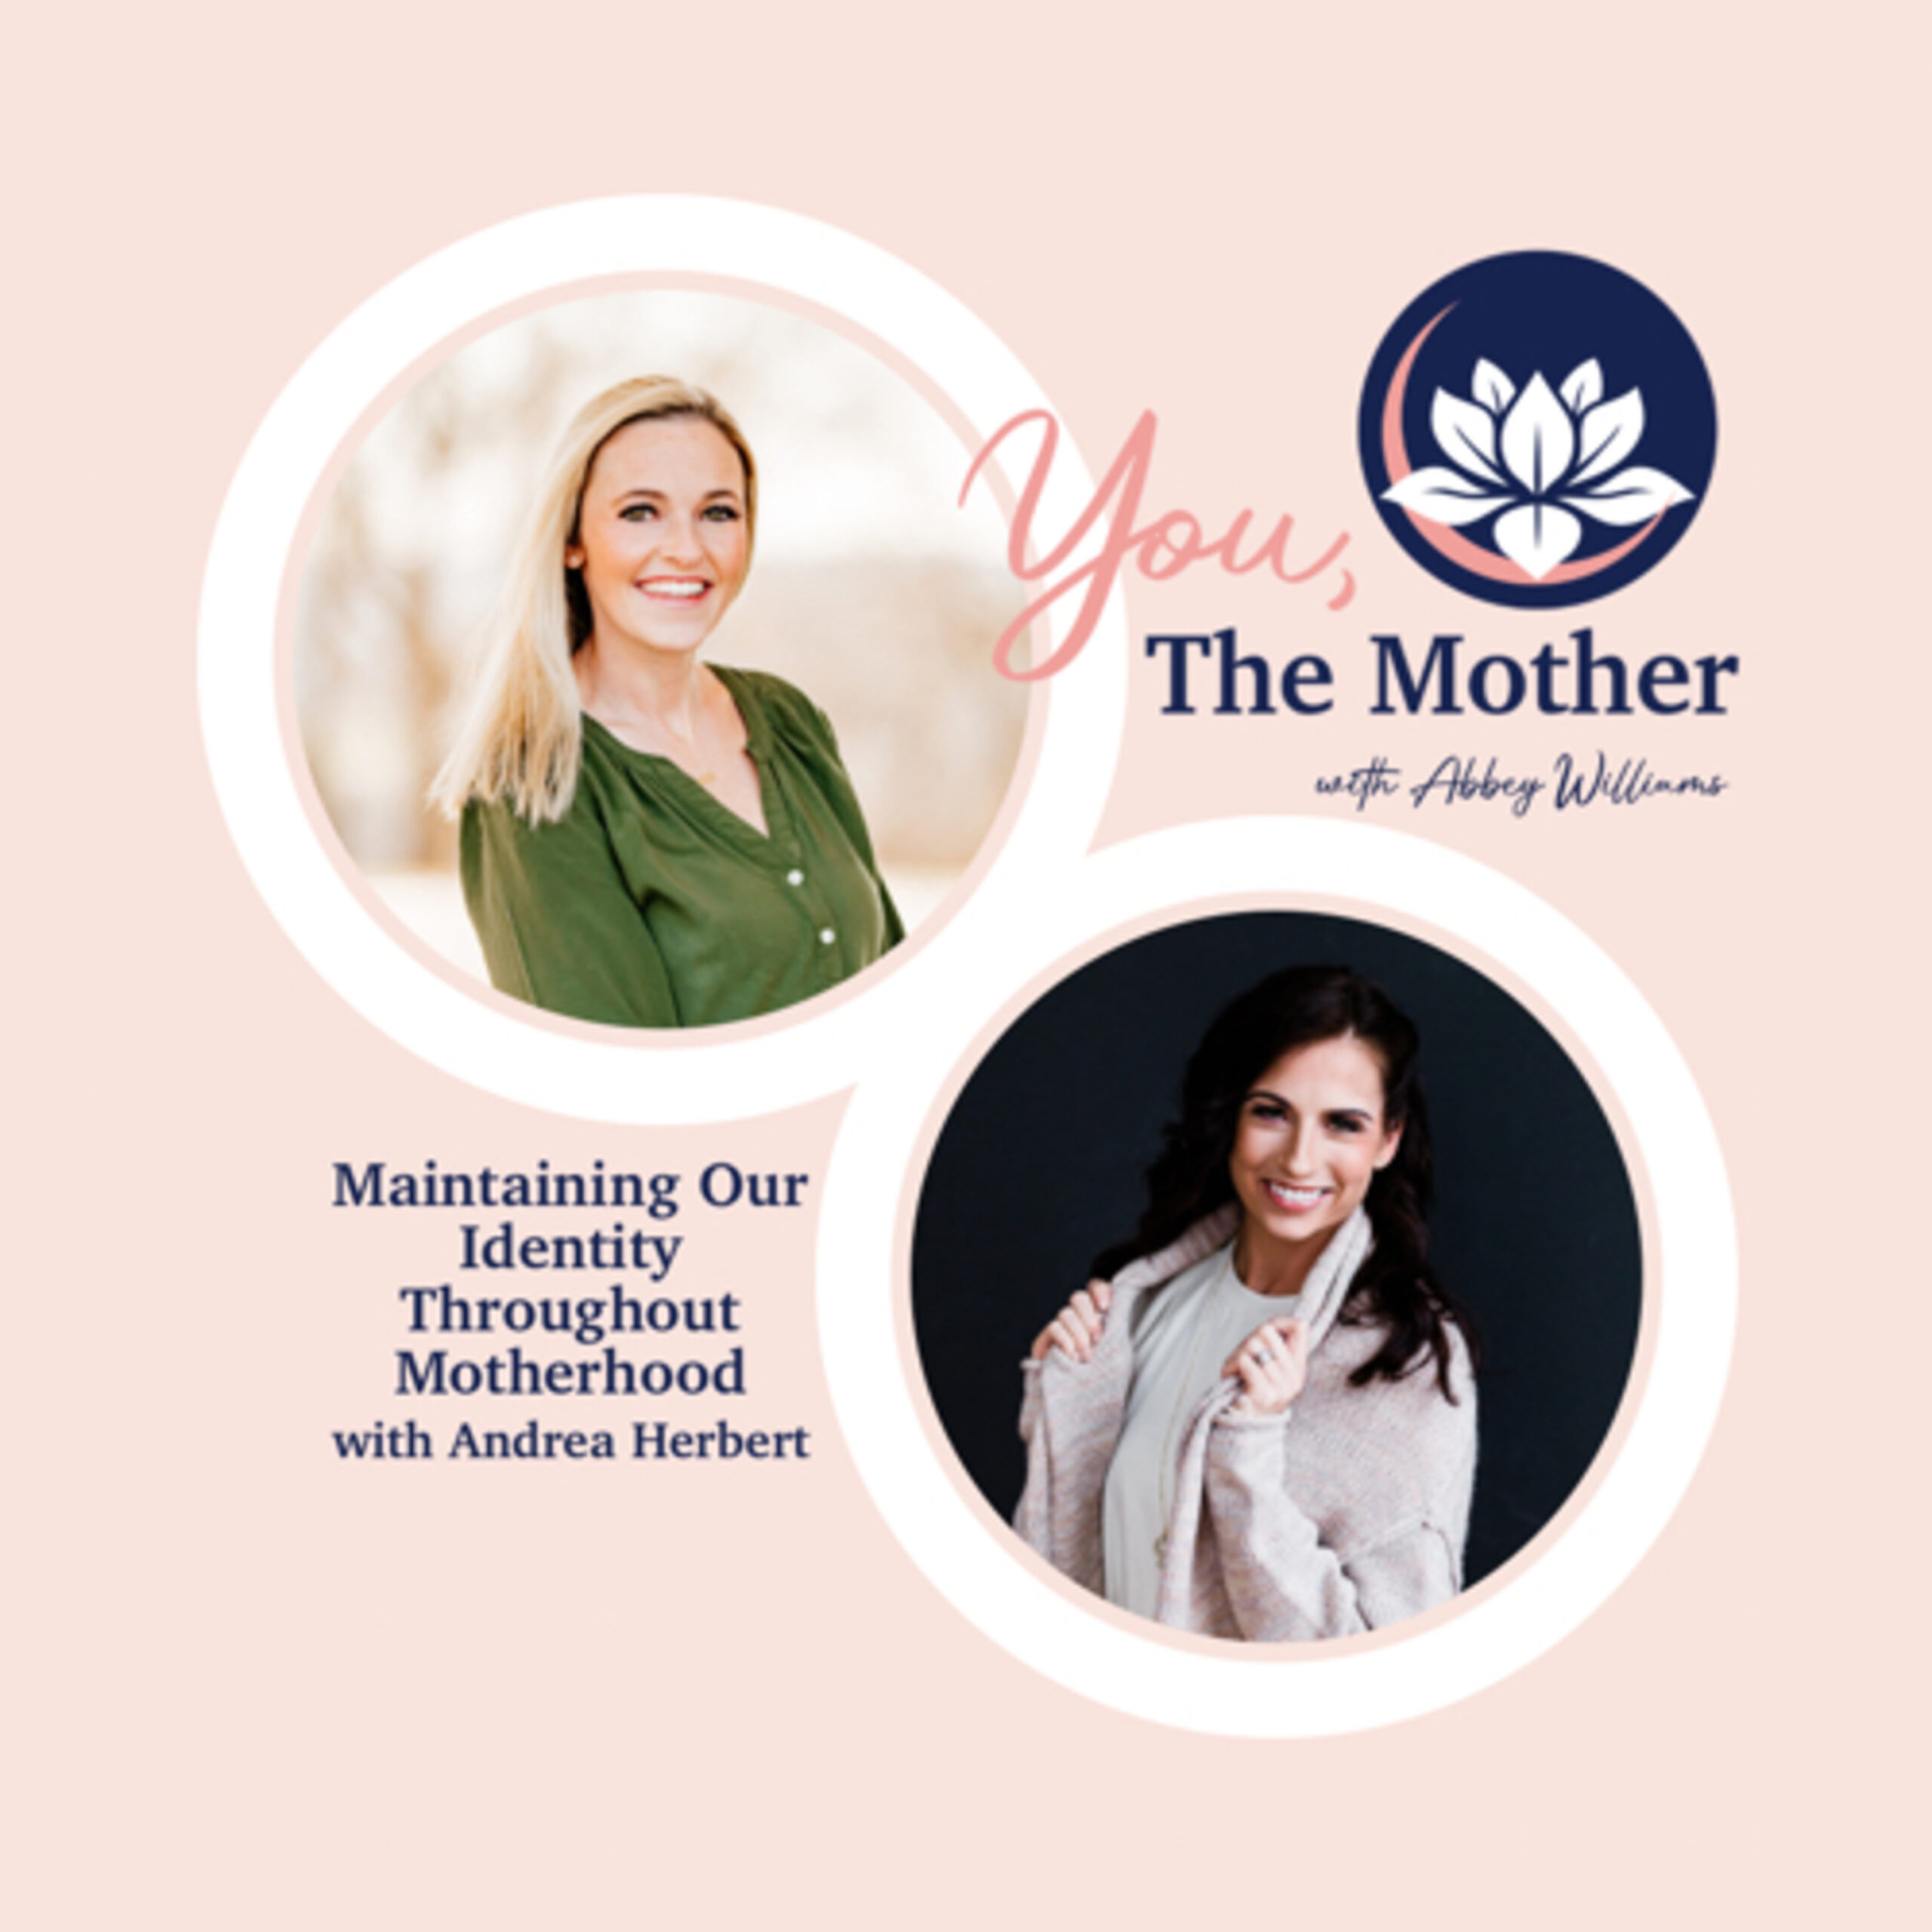 Maintaining Our Identity Throughout Motherhood with Andrea Herbert